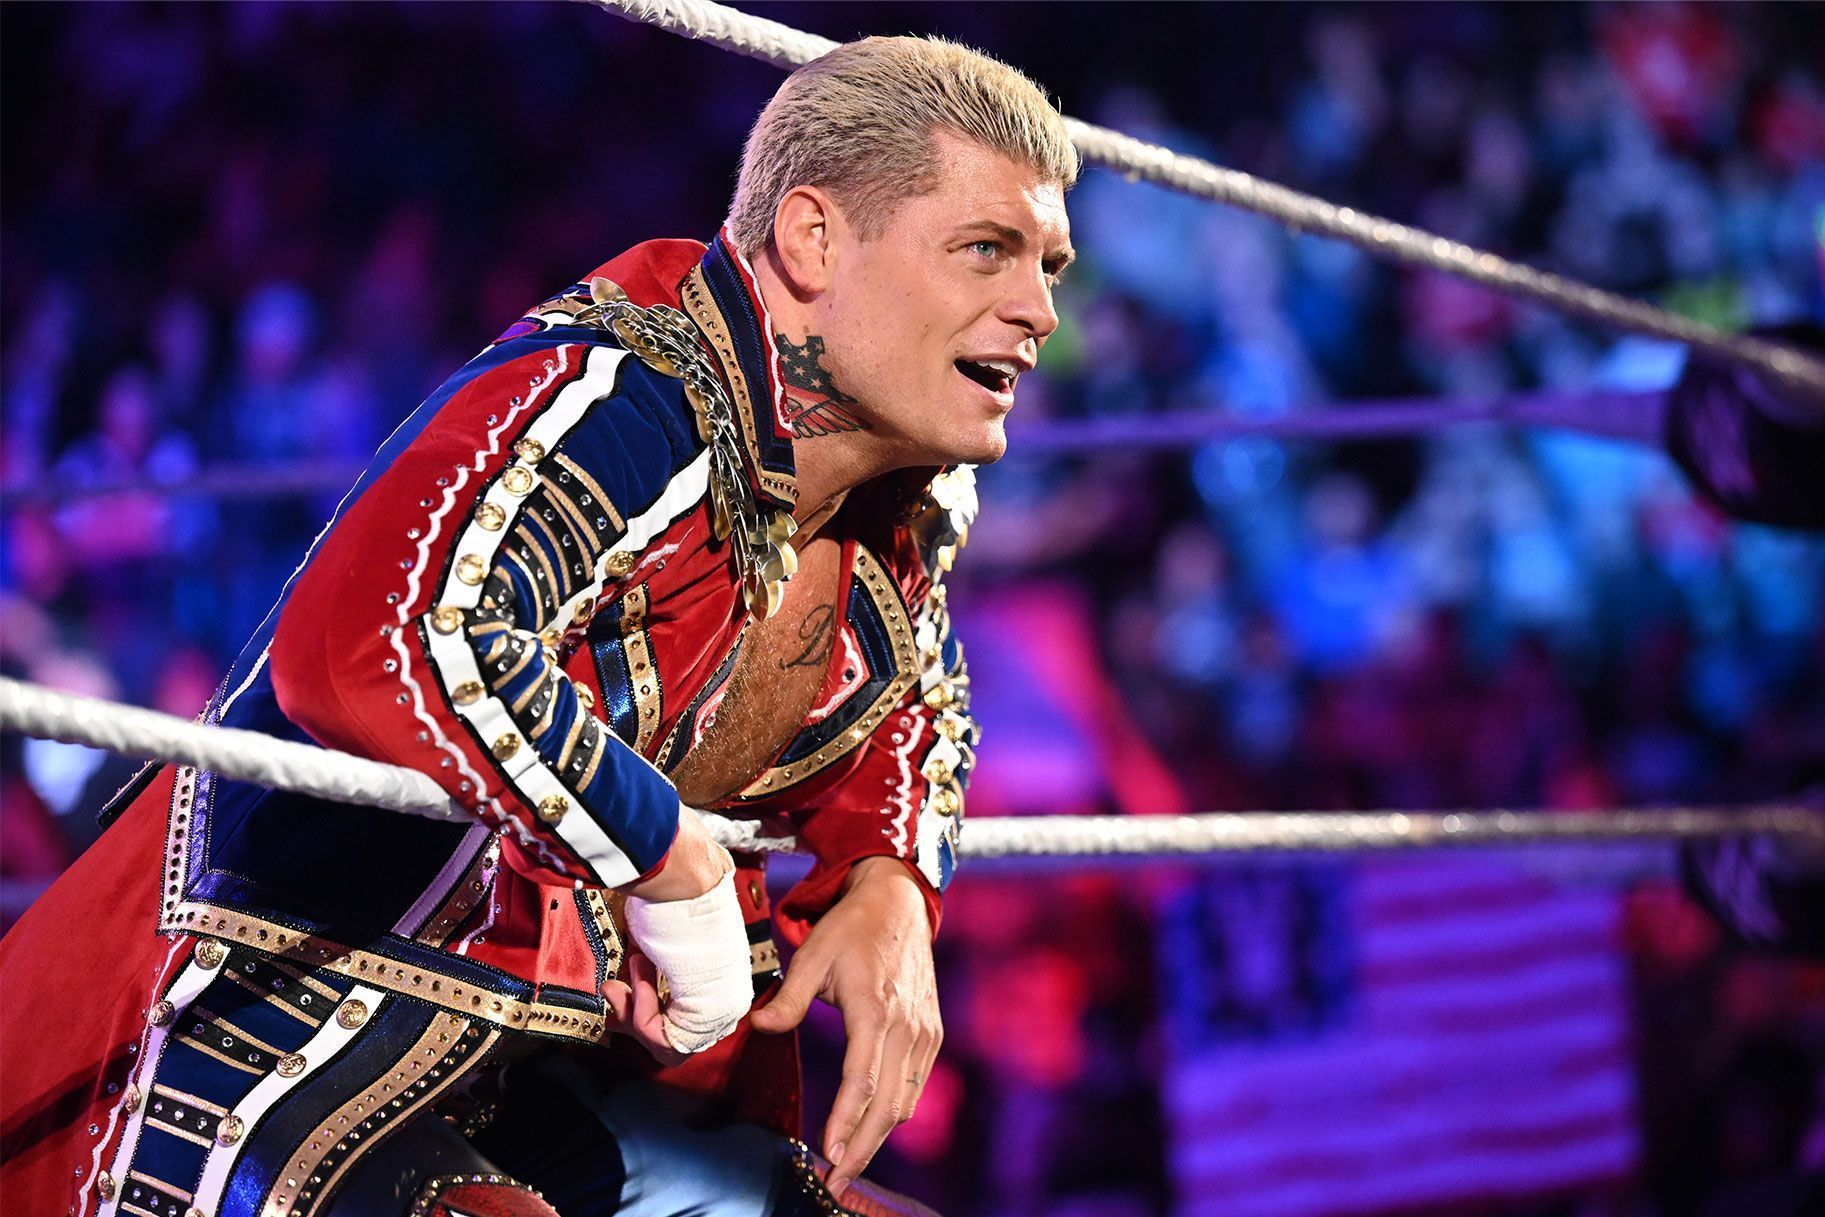 A SmackDown superstar is aiming Cody Rhodes